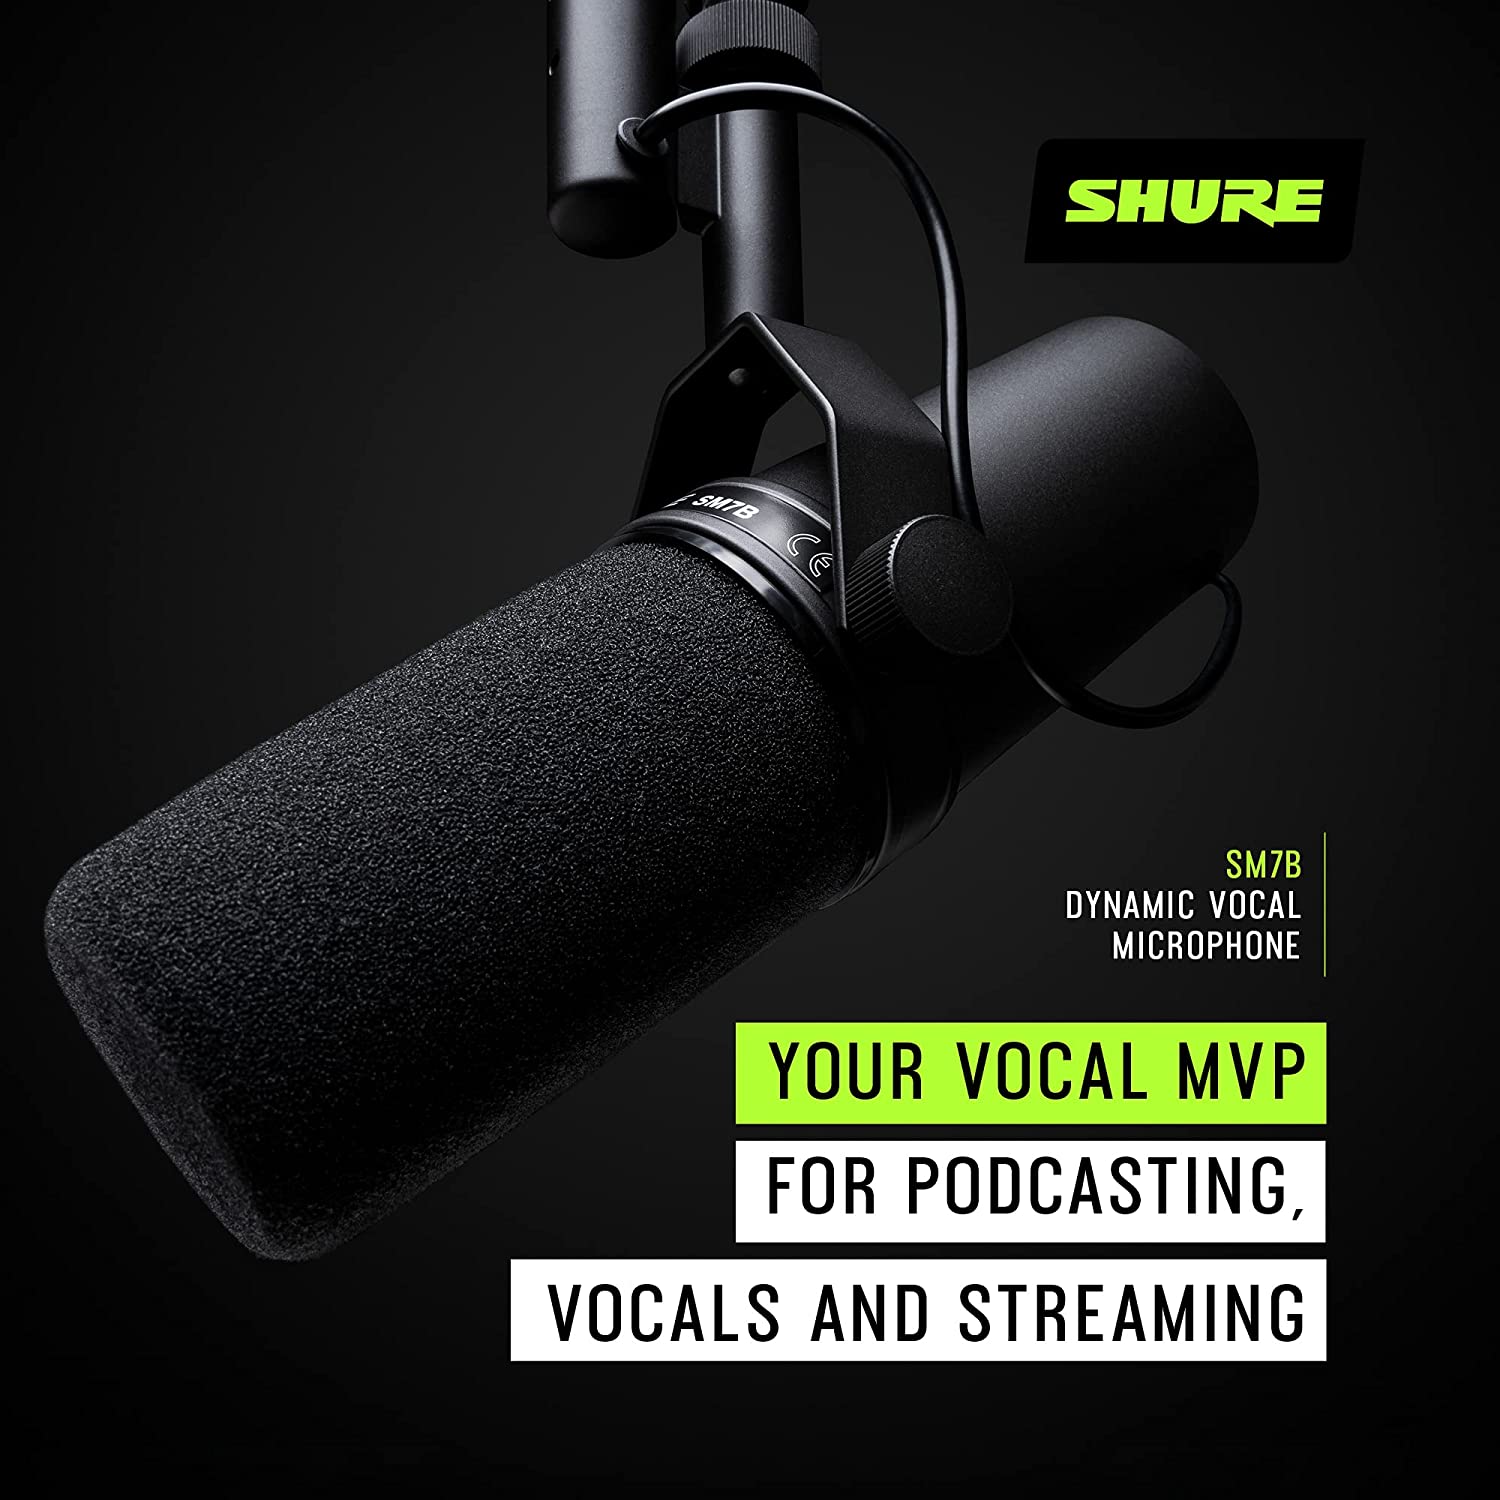 Shure SM7B Vocal Dynamic Microphone for Broadcast, Podcast & Recording, XLR Studio Mic for Music & Speech, Wide-Range Frequency, Warm & Smooth Sound, Rugged Construction, Detachable Windscreen - Black - image 4 of 6